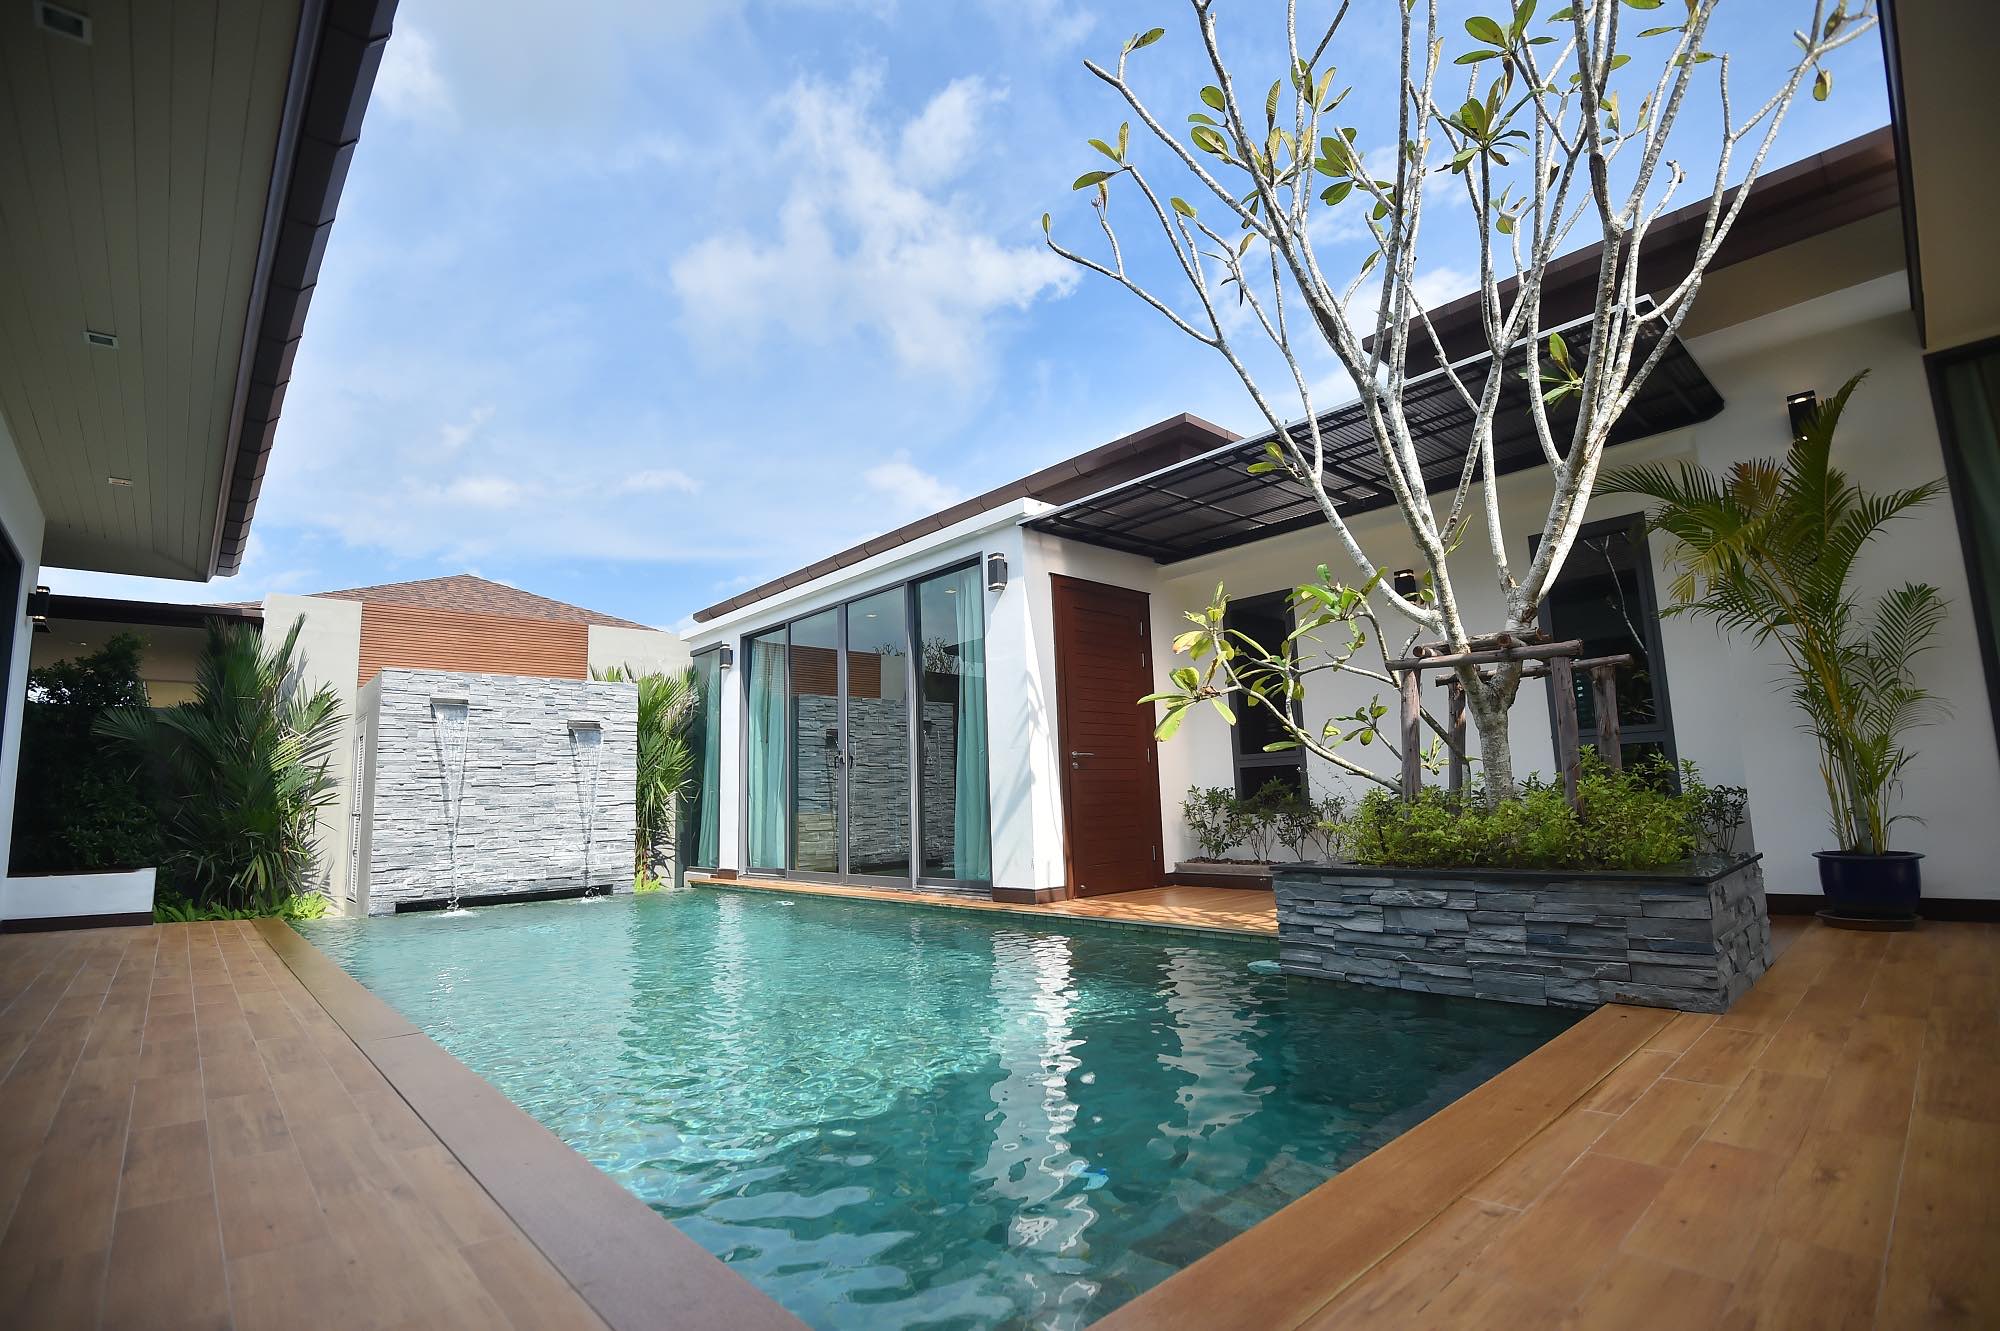 Luxury home for executives or families in Cherntalay phuket